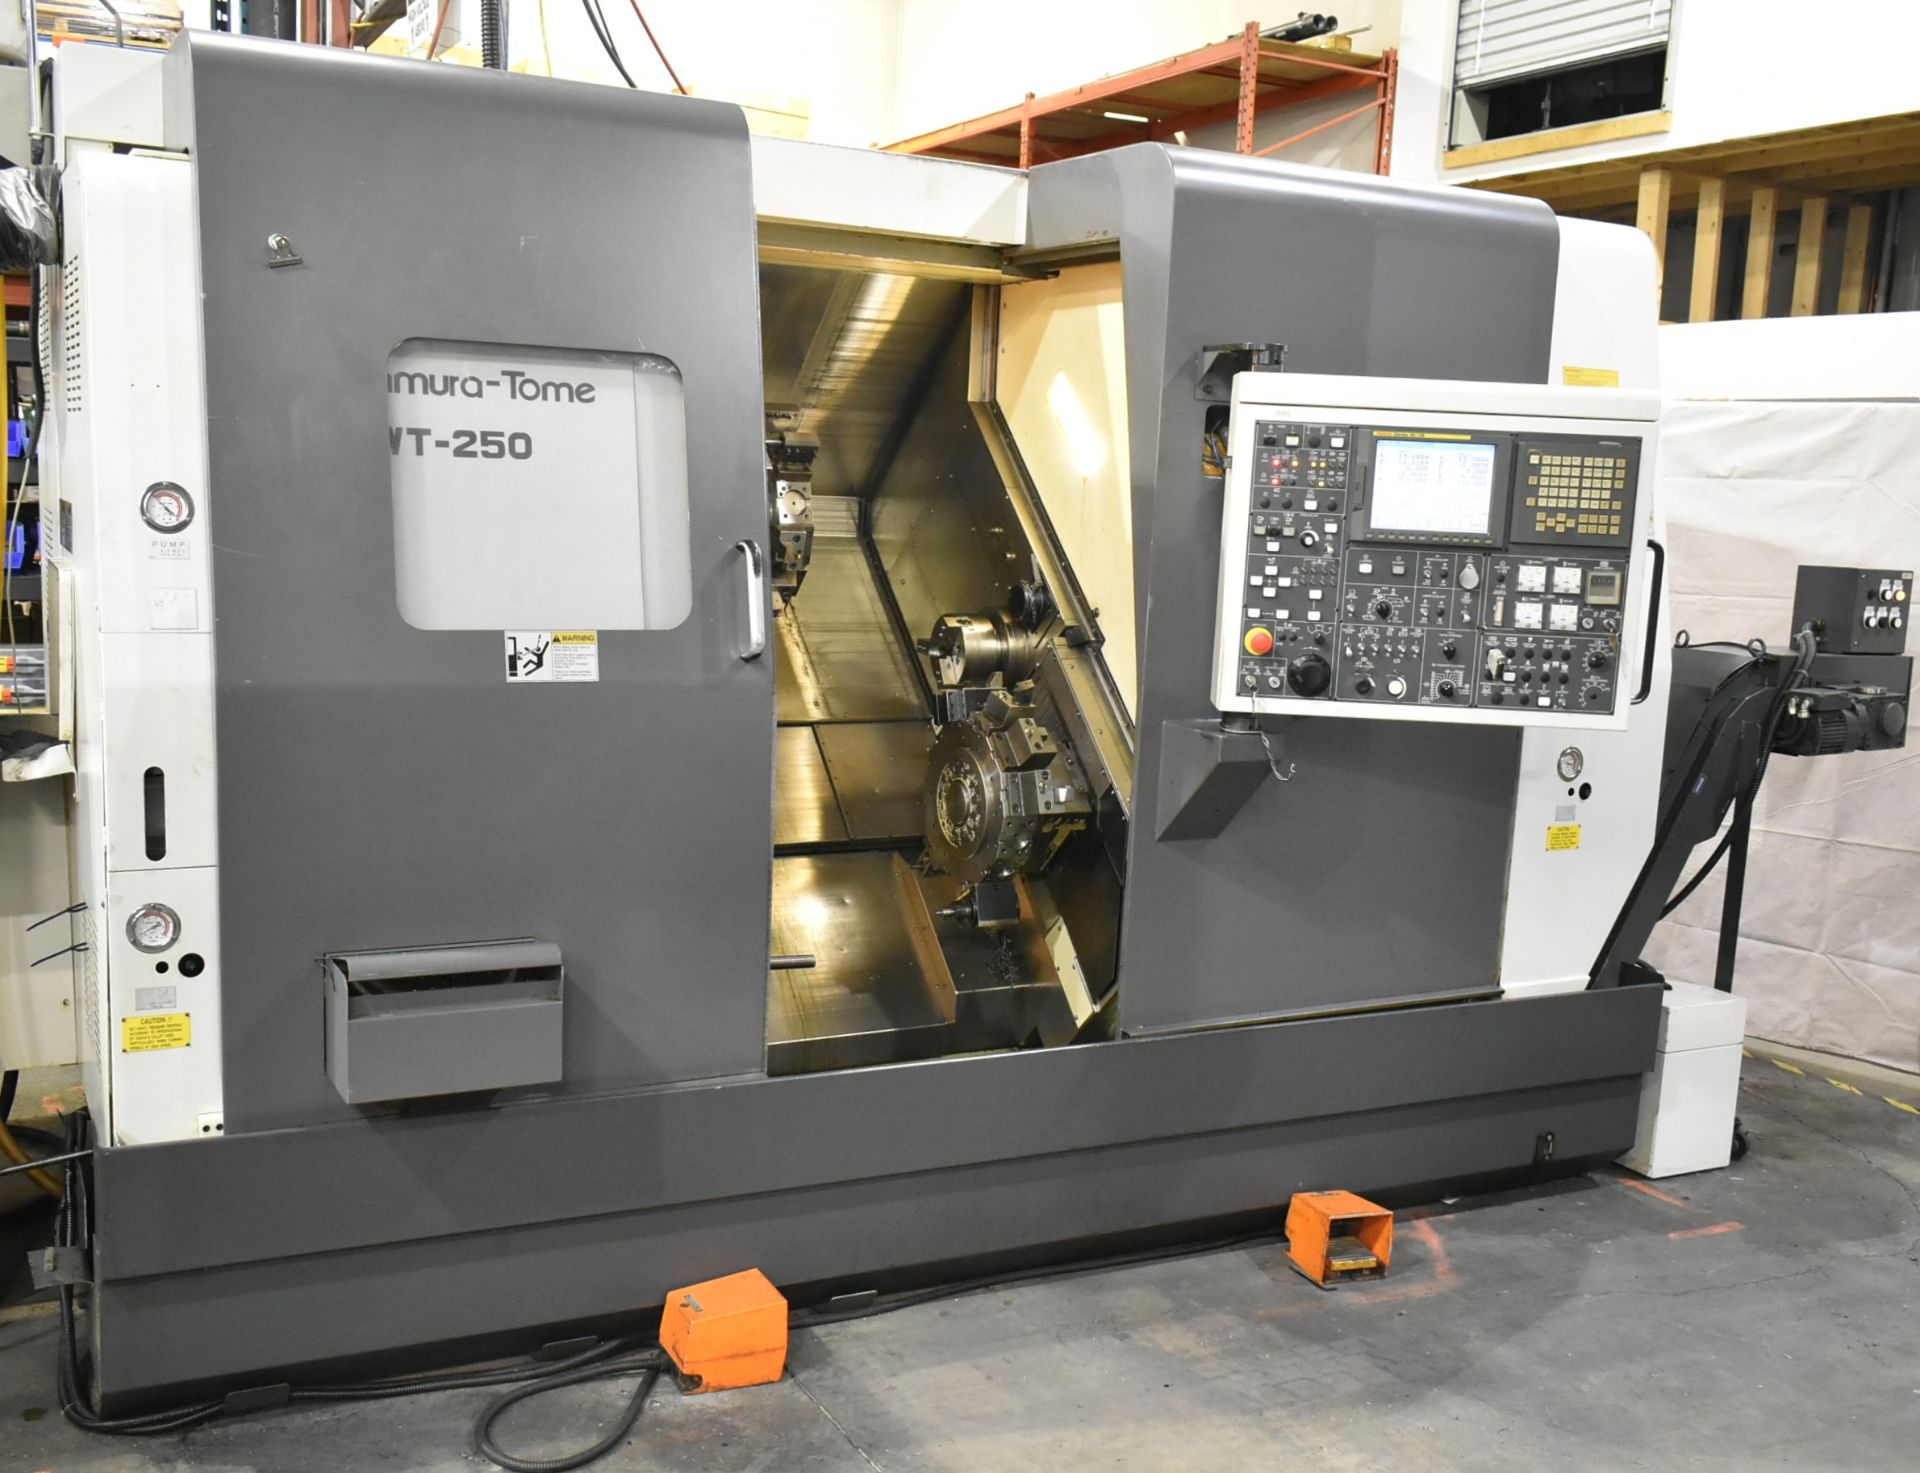 NAKAMURA TOME (2005) WT250 MULTI-AXIS OPPOSED SPINDLE AND TWIN TURRET CNC MULTI TASKING CENTER